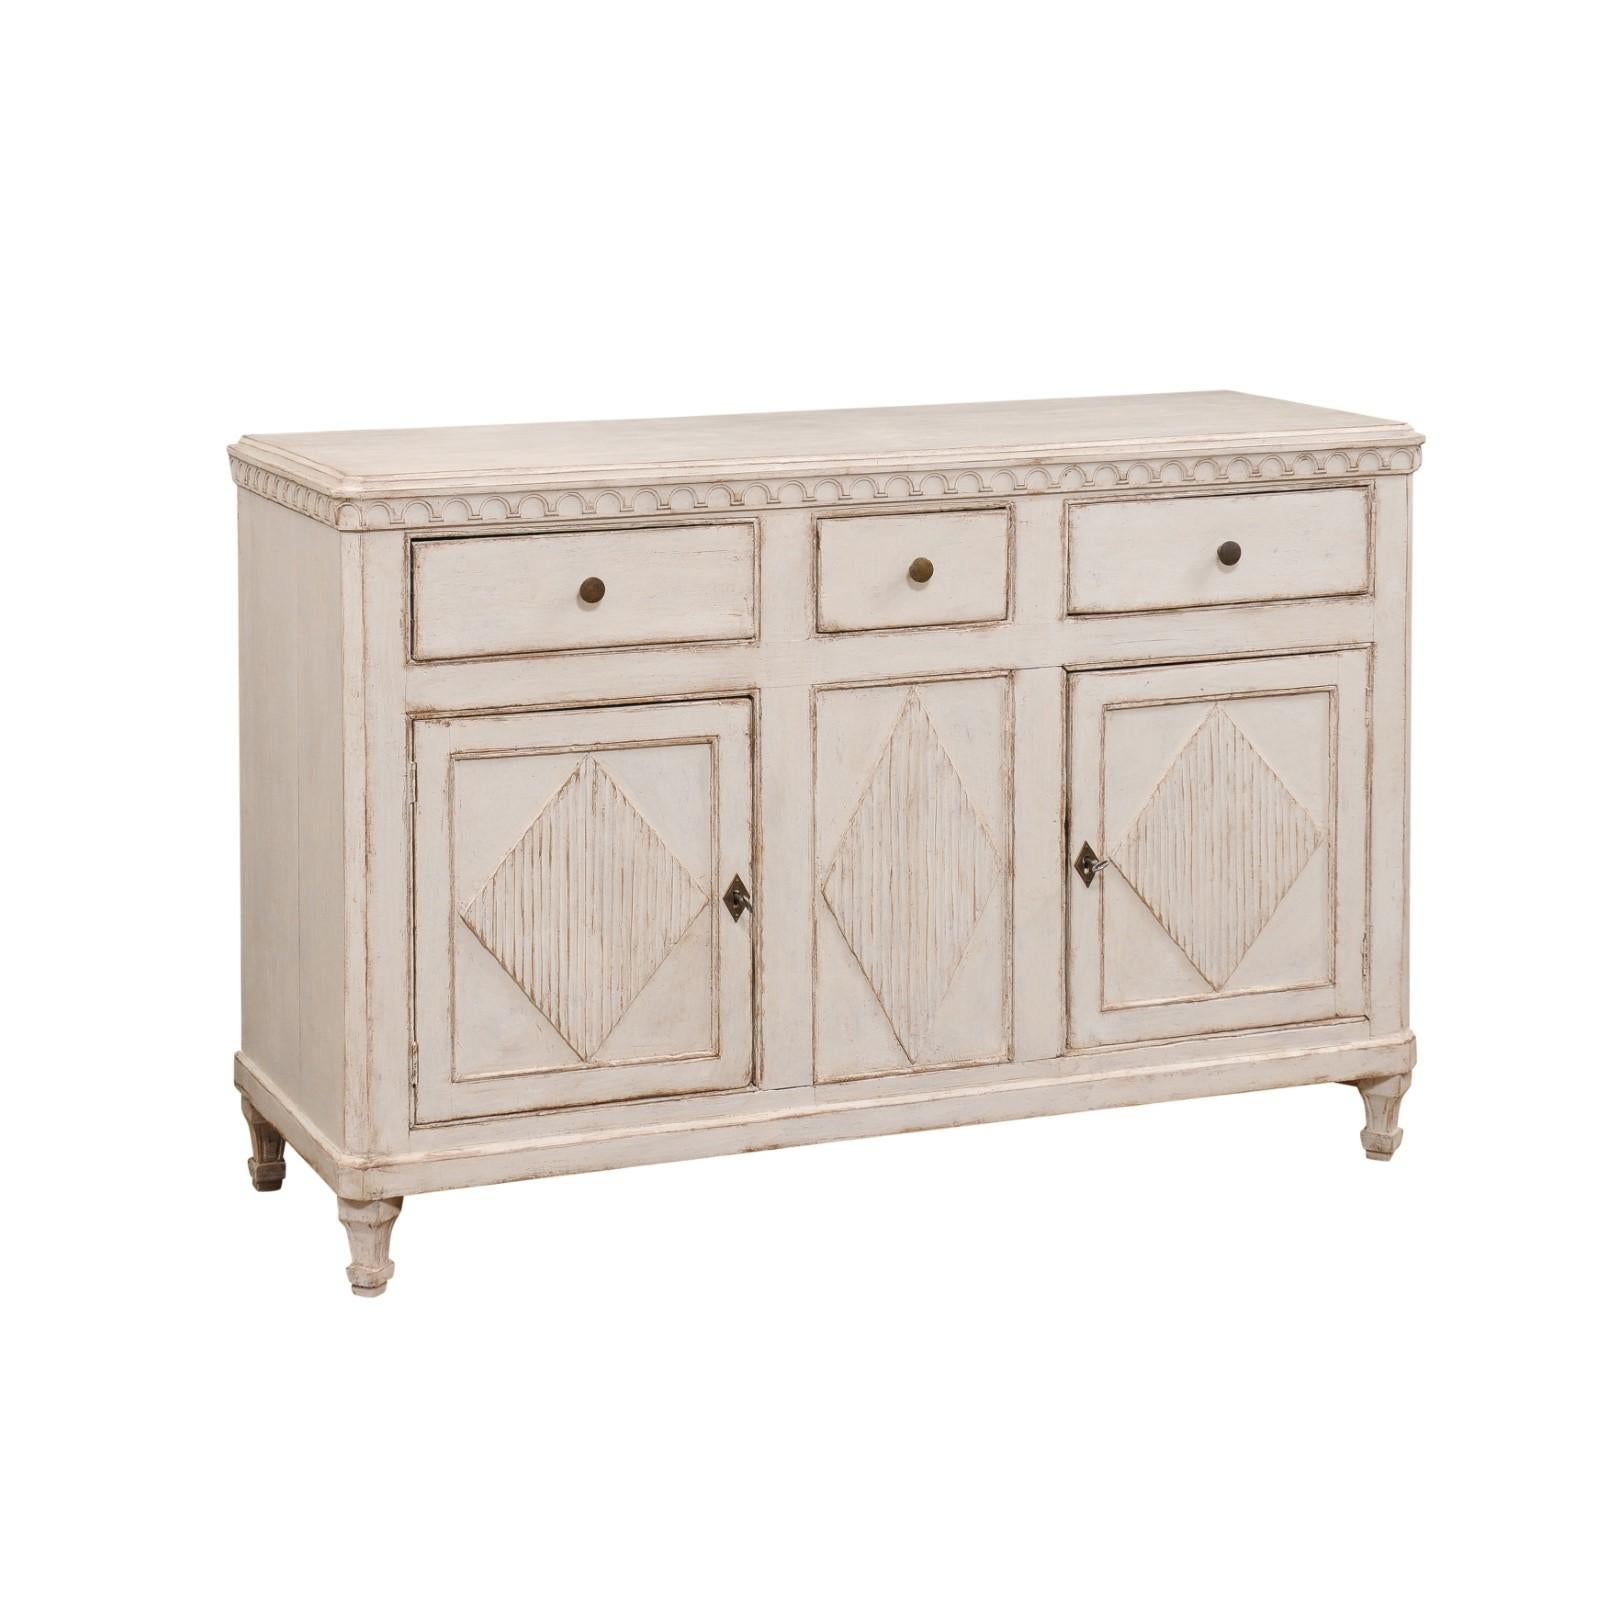 A Swedish Gustavian style painted wood sideboard from the 19th century with three drawers, two doors, carved arched-themed frieze, reeded diamond motifs and tapering feet. This alluring Swedish Gustavian style painted wood sideboard, hailing from